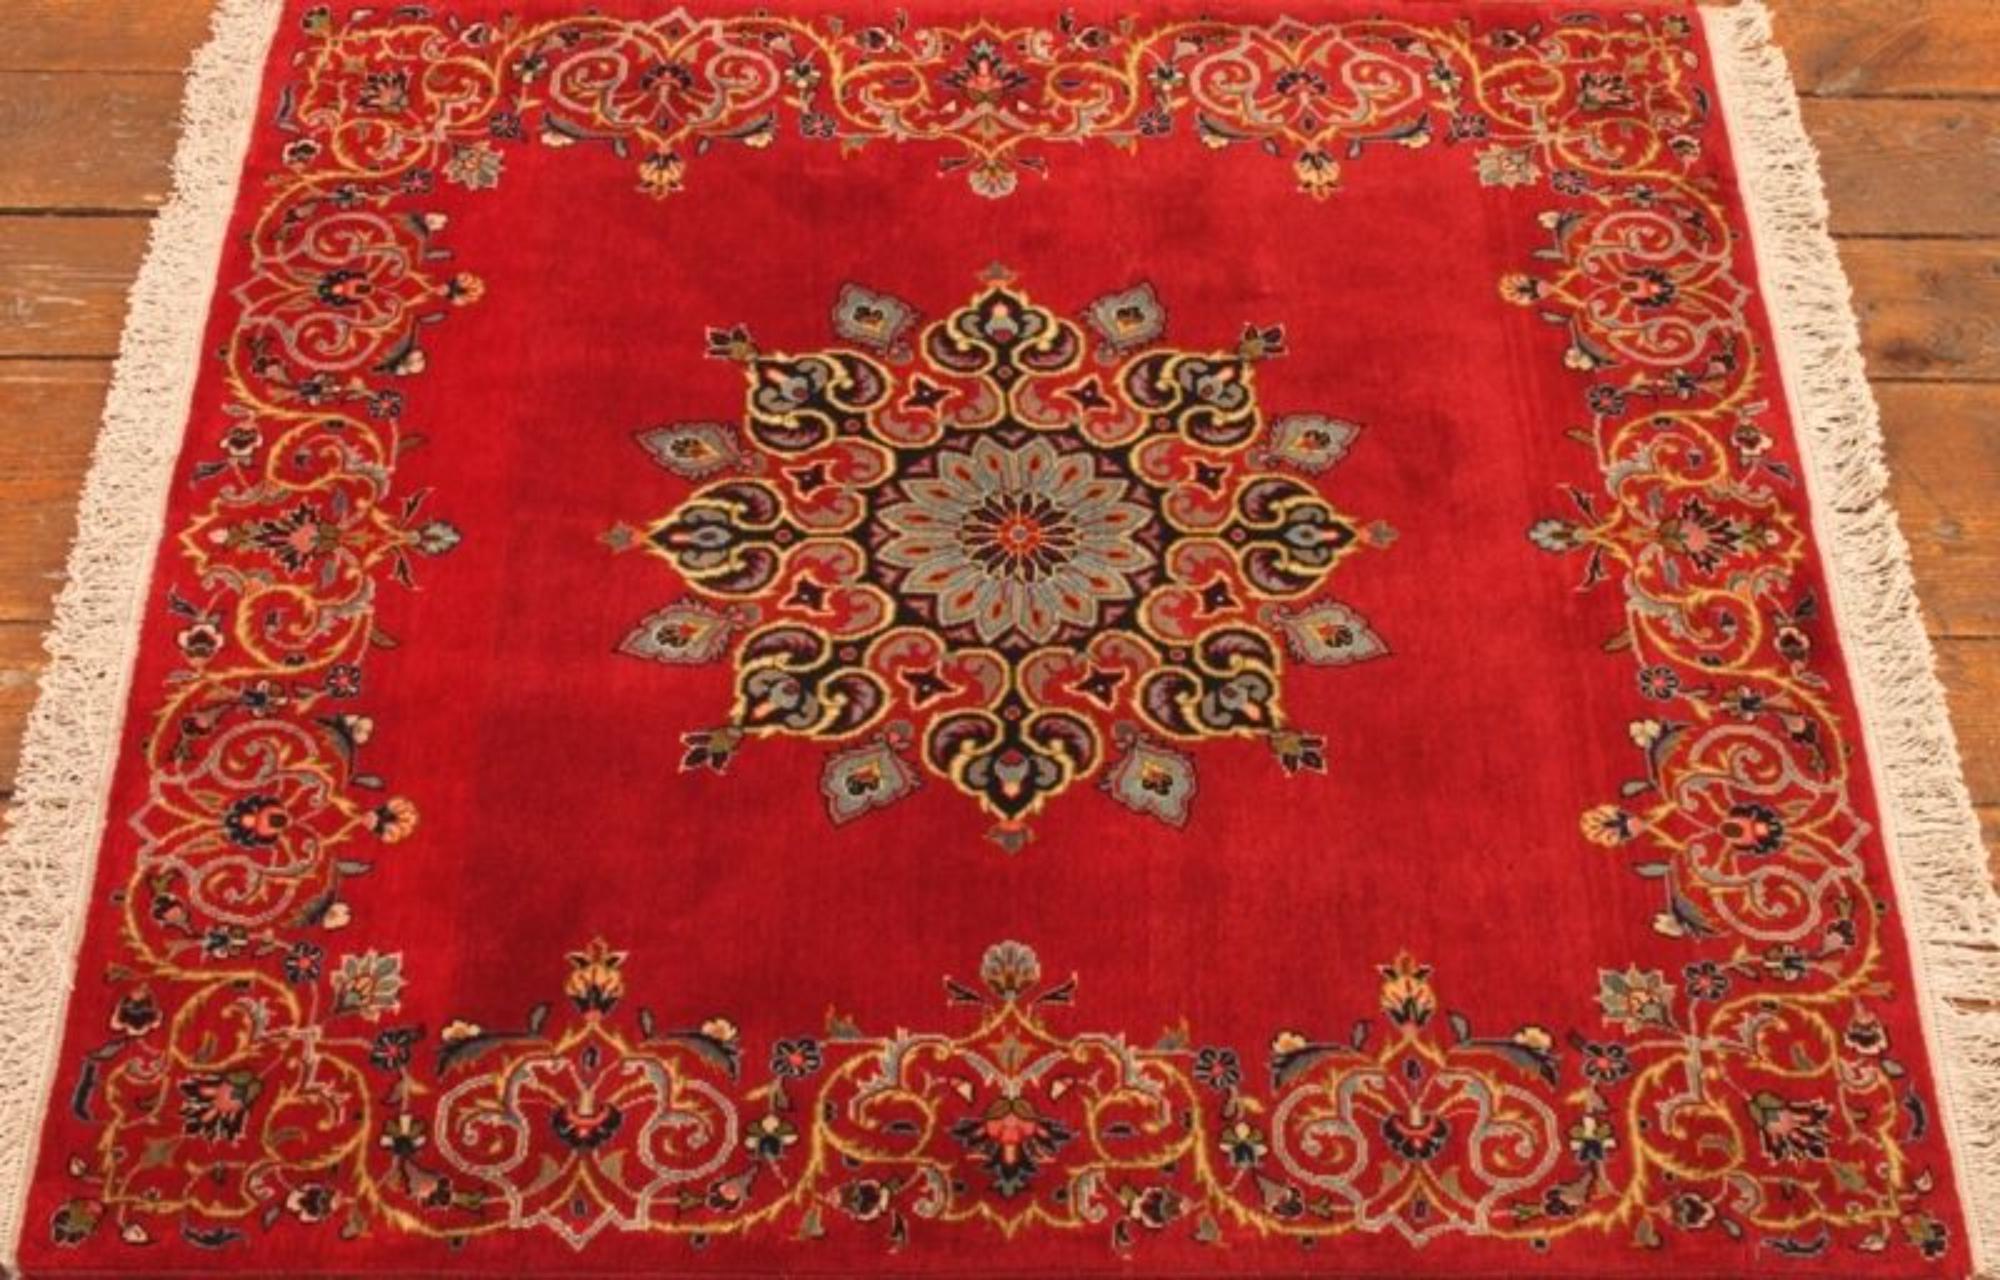 Handmade Vintage Persian Style Kashan Square Rug 3.1' x 3.6', 1970s - 1T27 In Good Condition For Sale In Bordeaux, FR